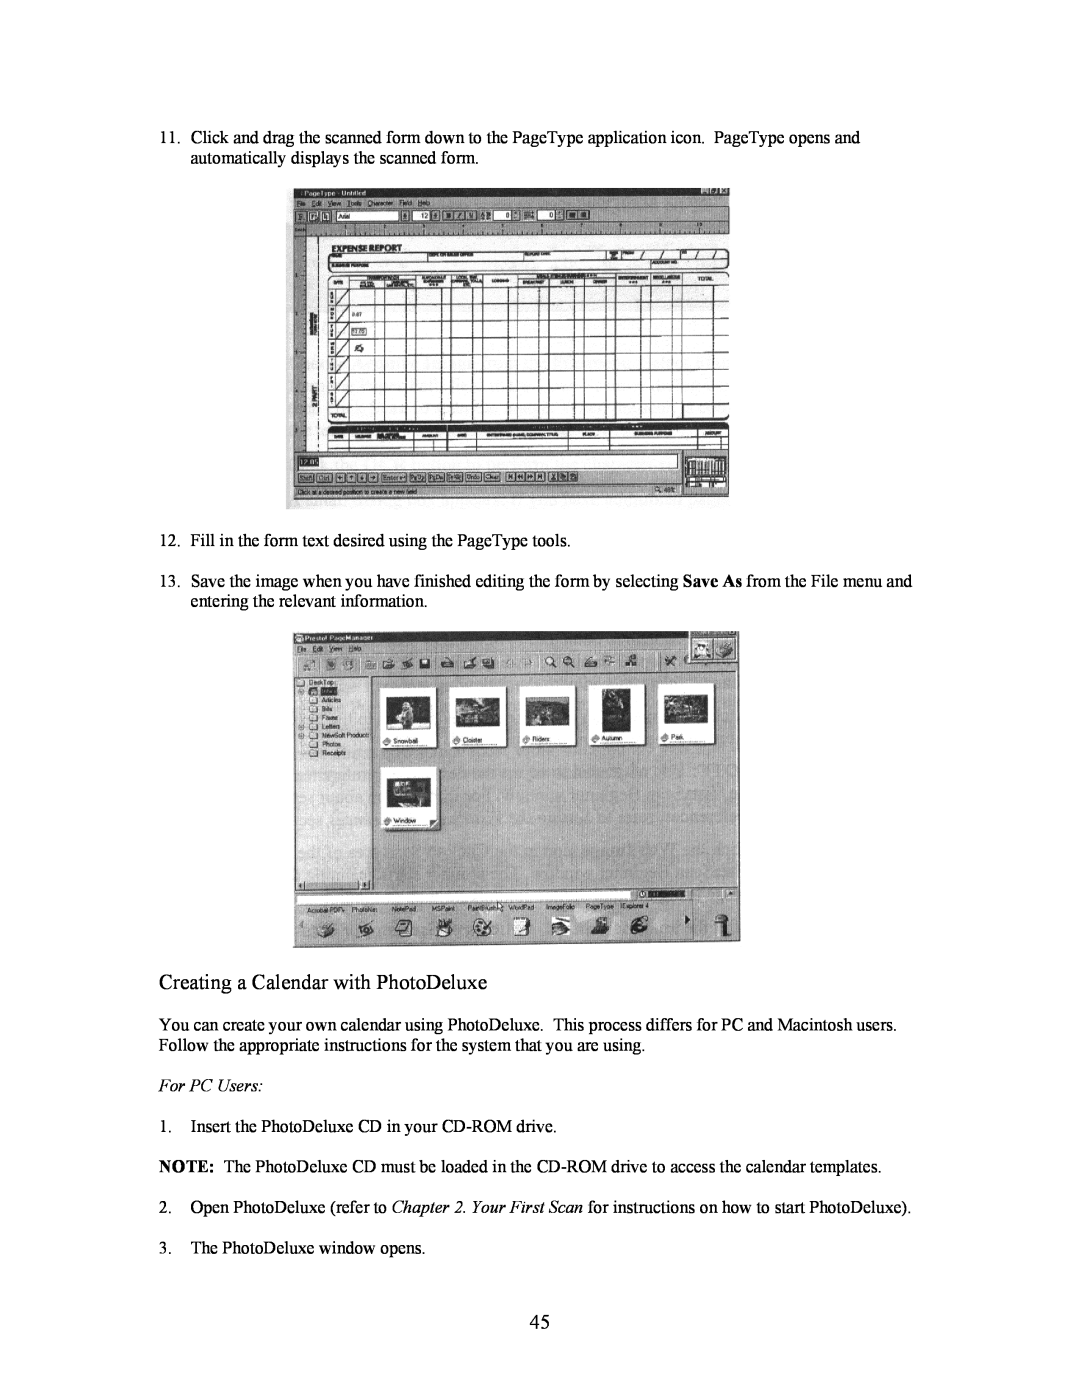 UMAX Technologies 3450, Astra 3400 owner manual Creating a Calendar with PhotoDeluxe, For PC Users 